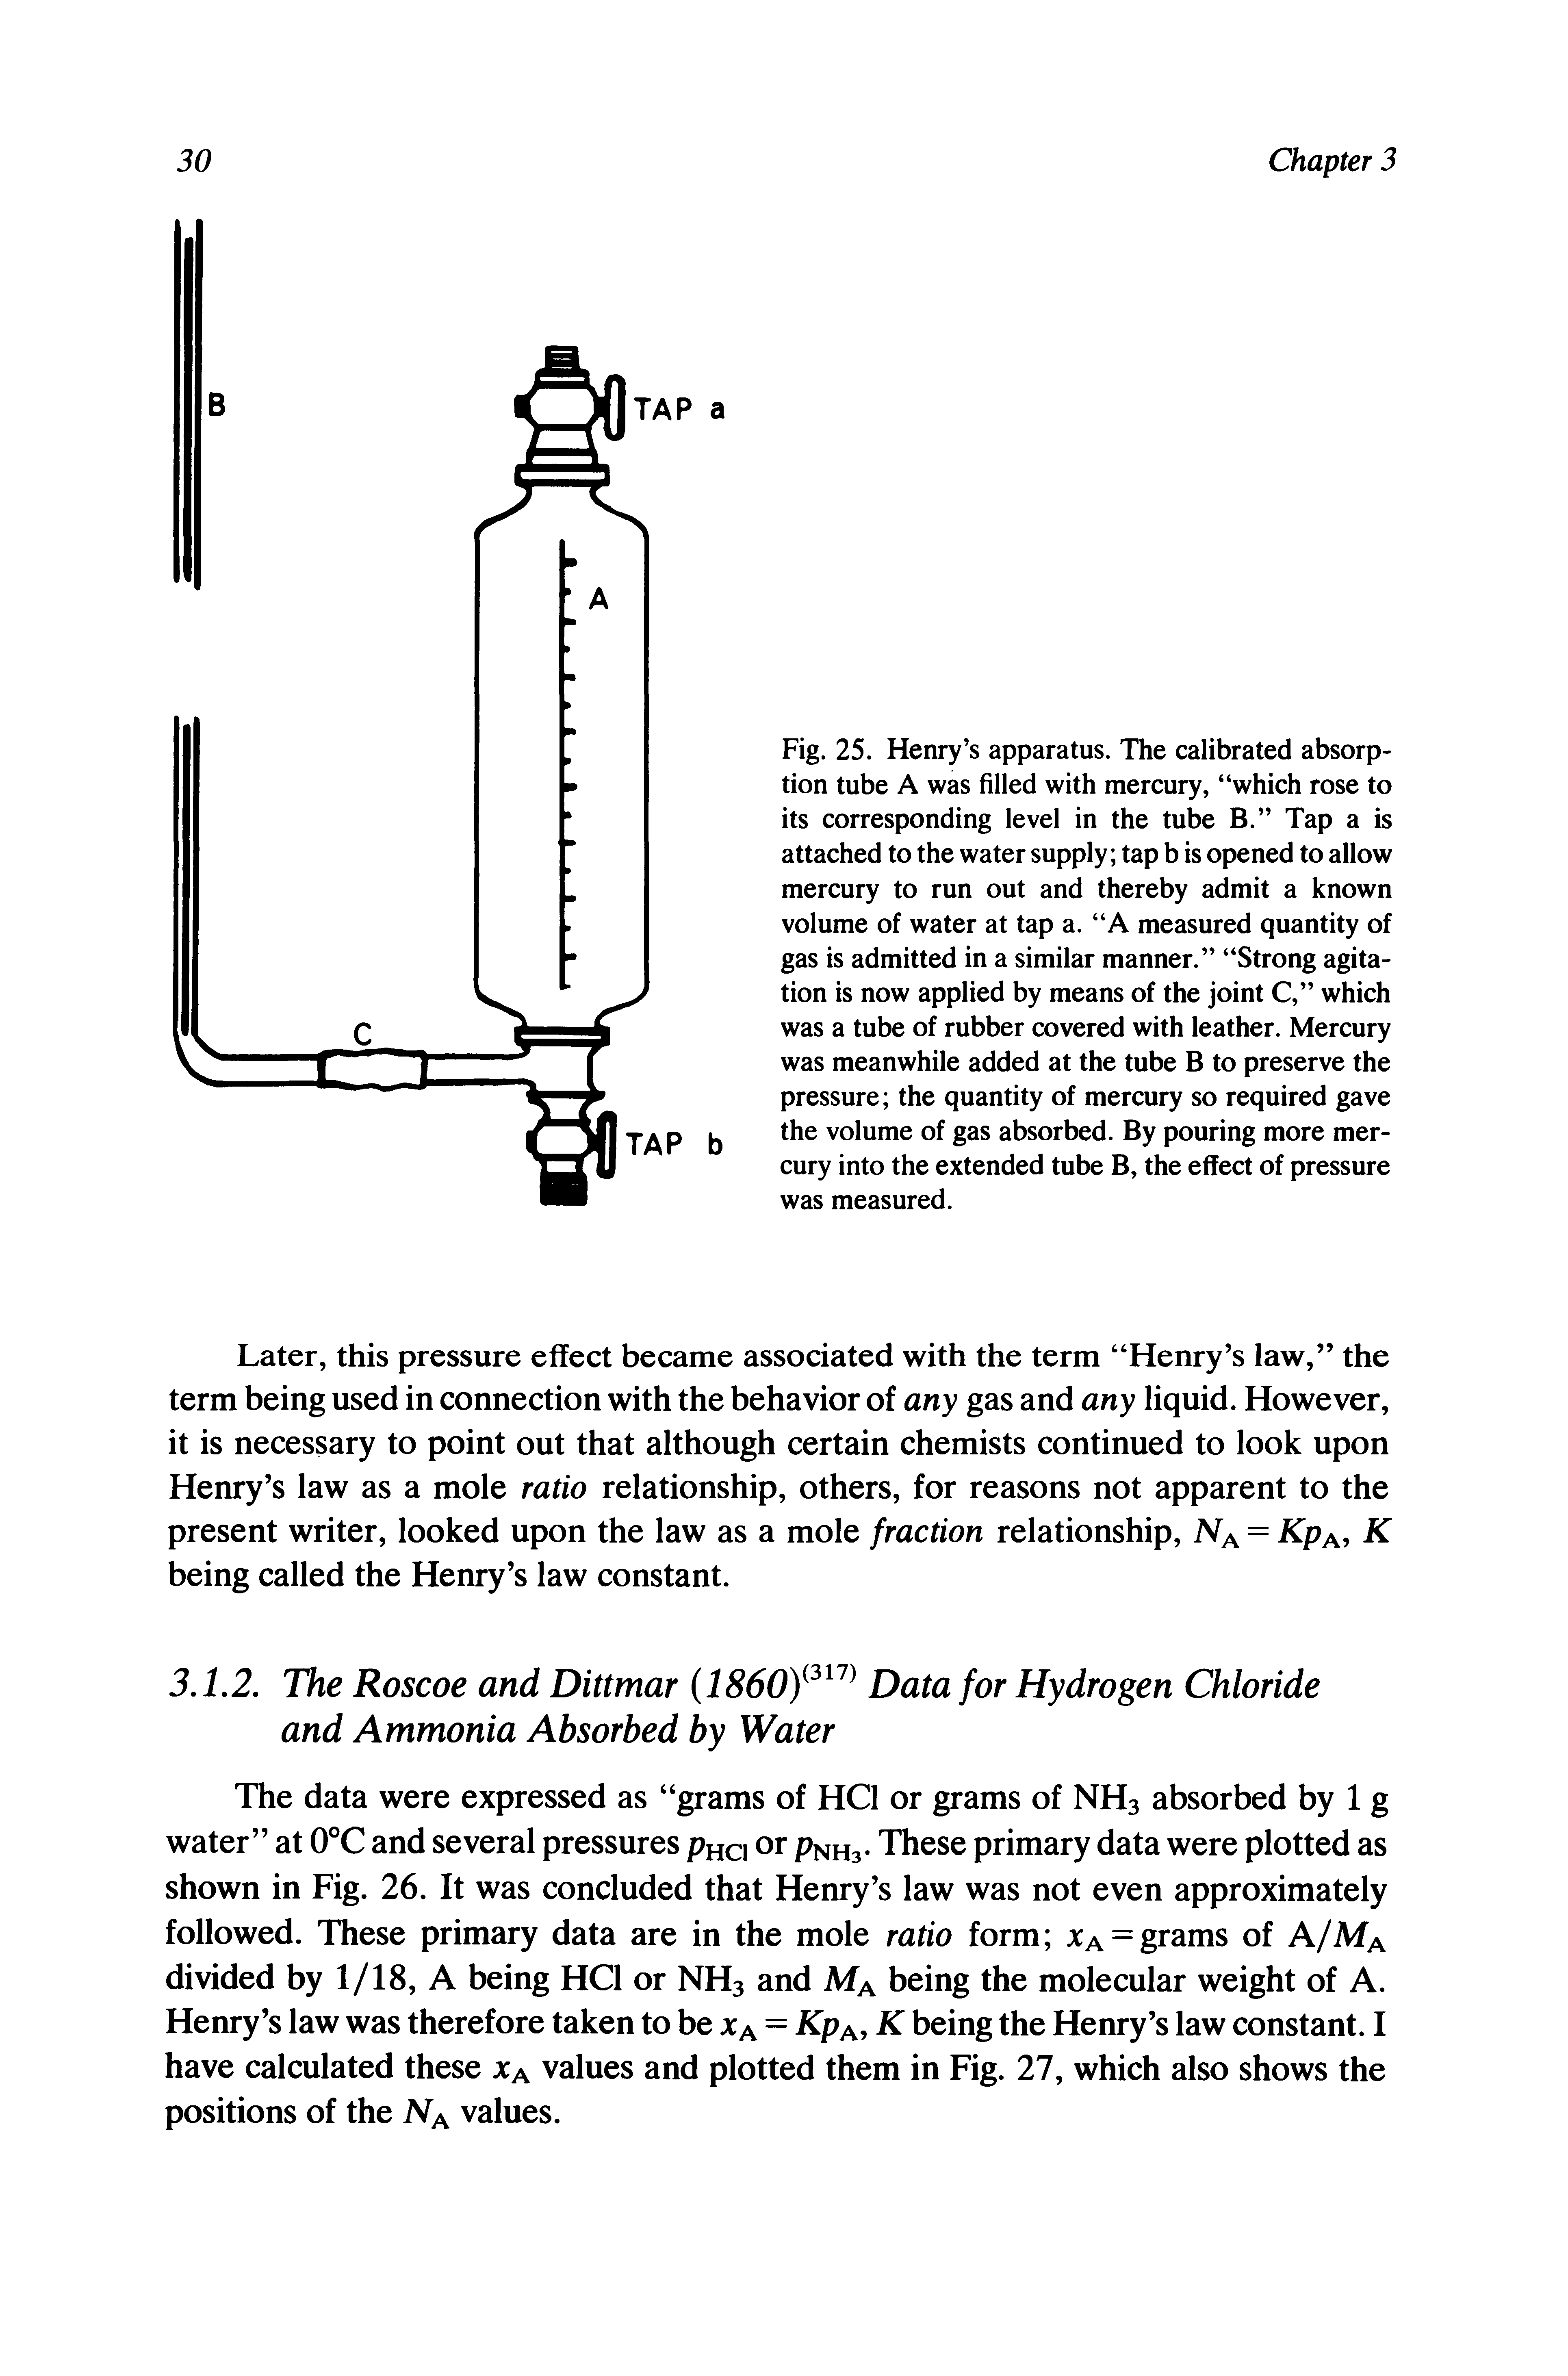 Fig. 25. Henry s apparatus. The calibrated absorption tube A was filled with mercury, which rose to its corresponding level in the tube B. Tap a is attached to the water supply tap b is opened to allow mercury to run out and thereby admit a known volume of water at tap a. A measured quantity of gas is admitted in a similar manner. Strong agitation is now applied by means of the joint C, which was a tube of rubber covered with leather. Mercury was meanwhile added at the tube B to preserve the pressure the quantity of mercury so required gave the volume of gas absorbed. By pouring more mercury into the extended tube B, the effect of pressure was measured.